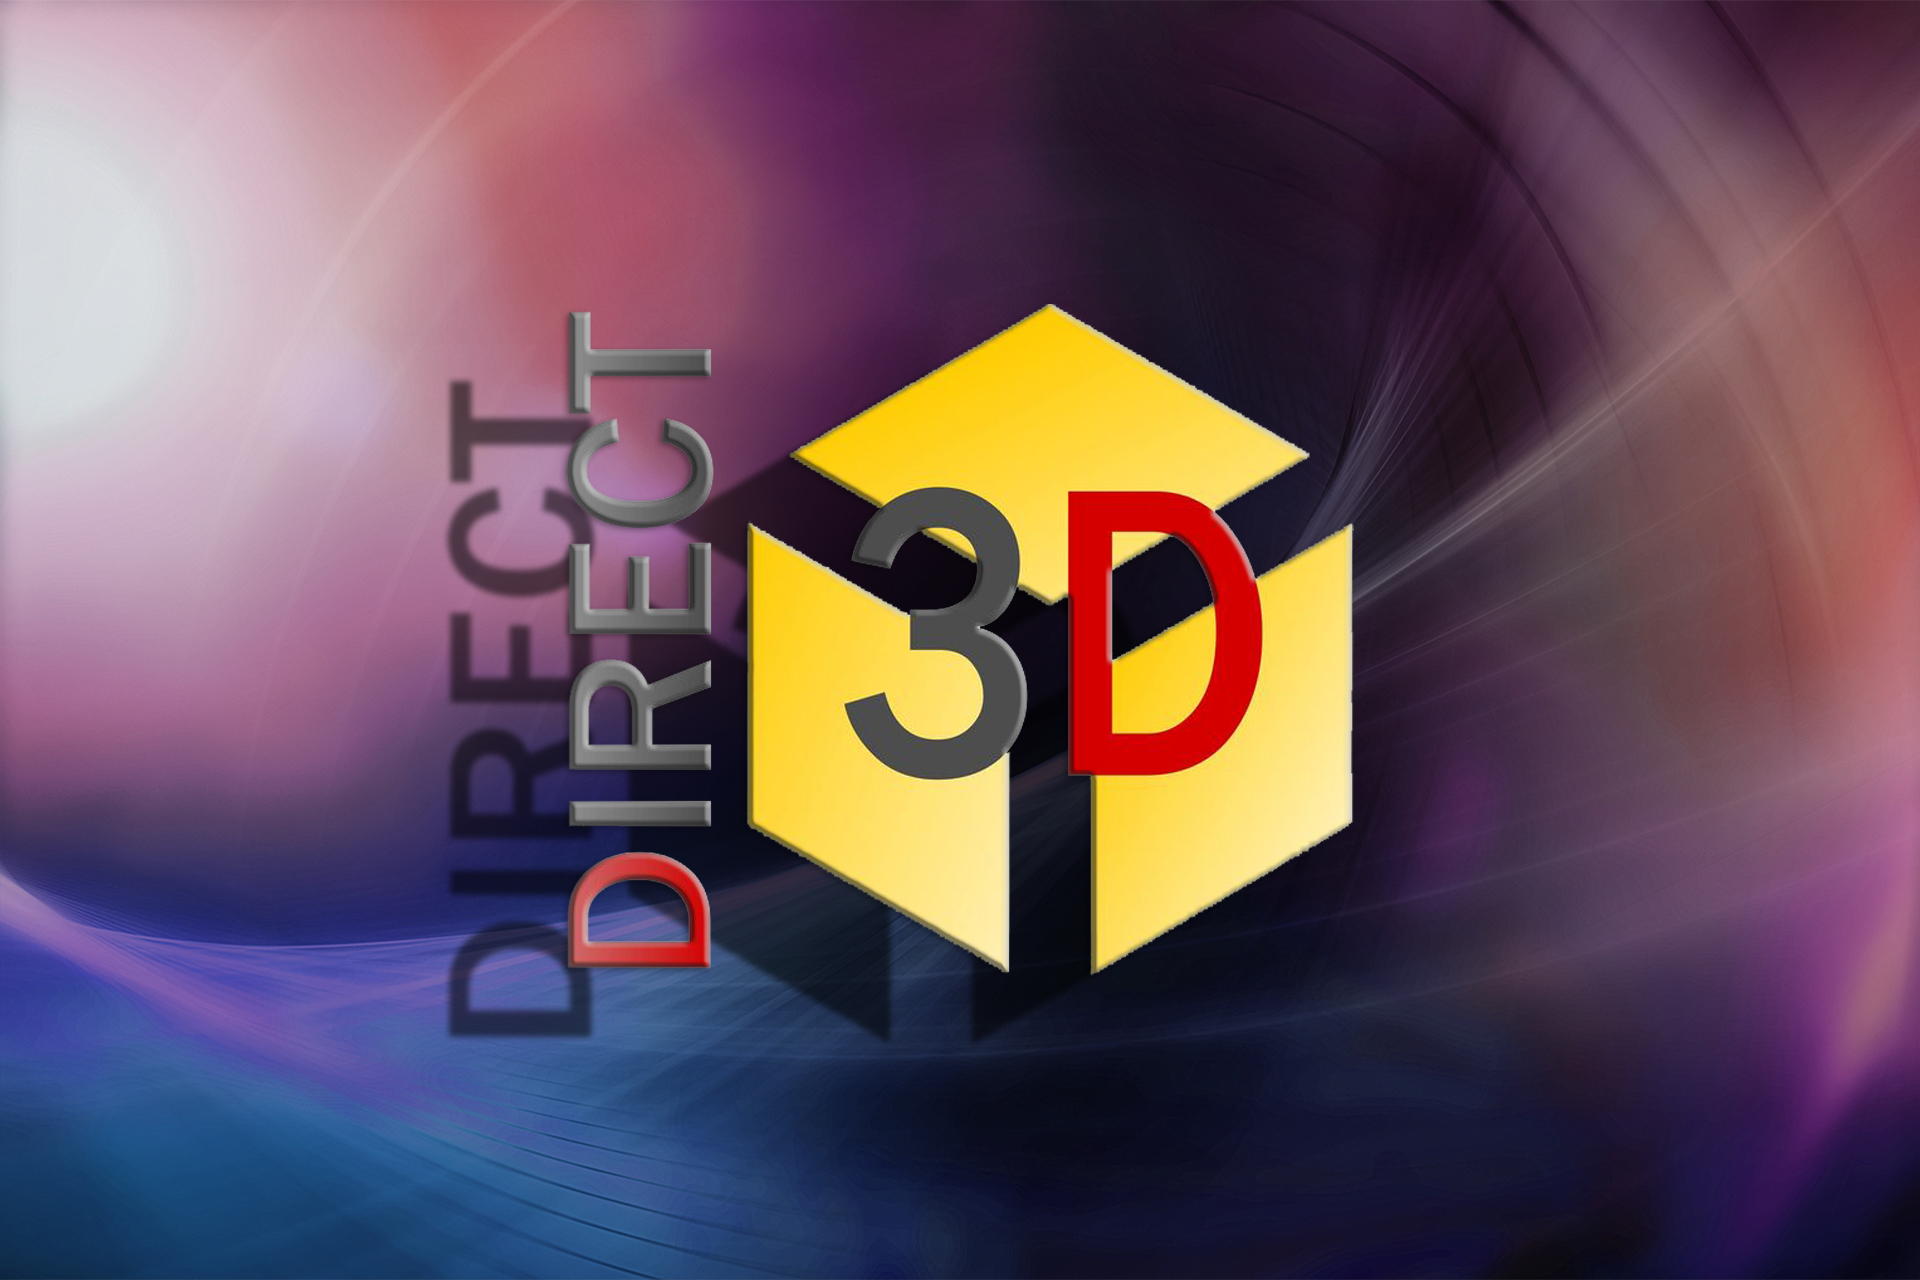 Could not initialize Direct3D